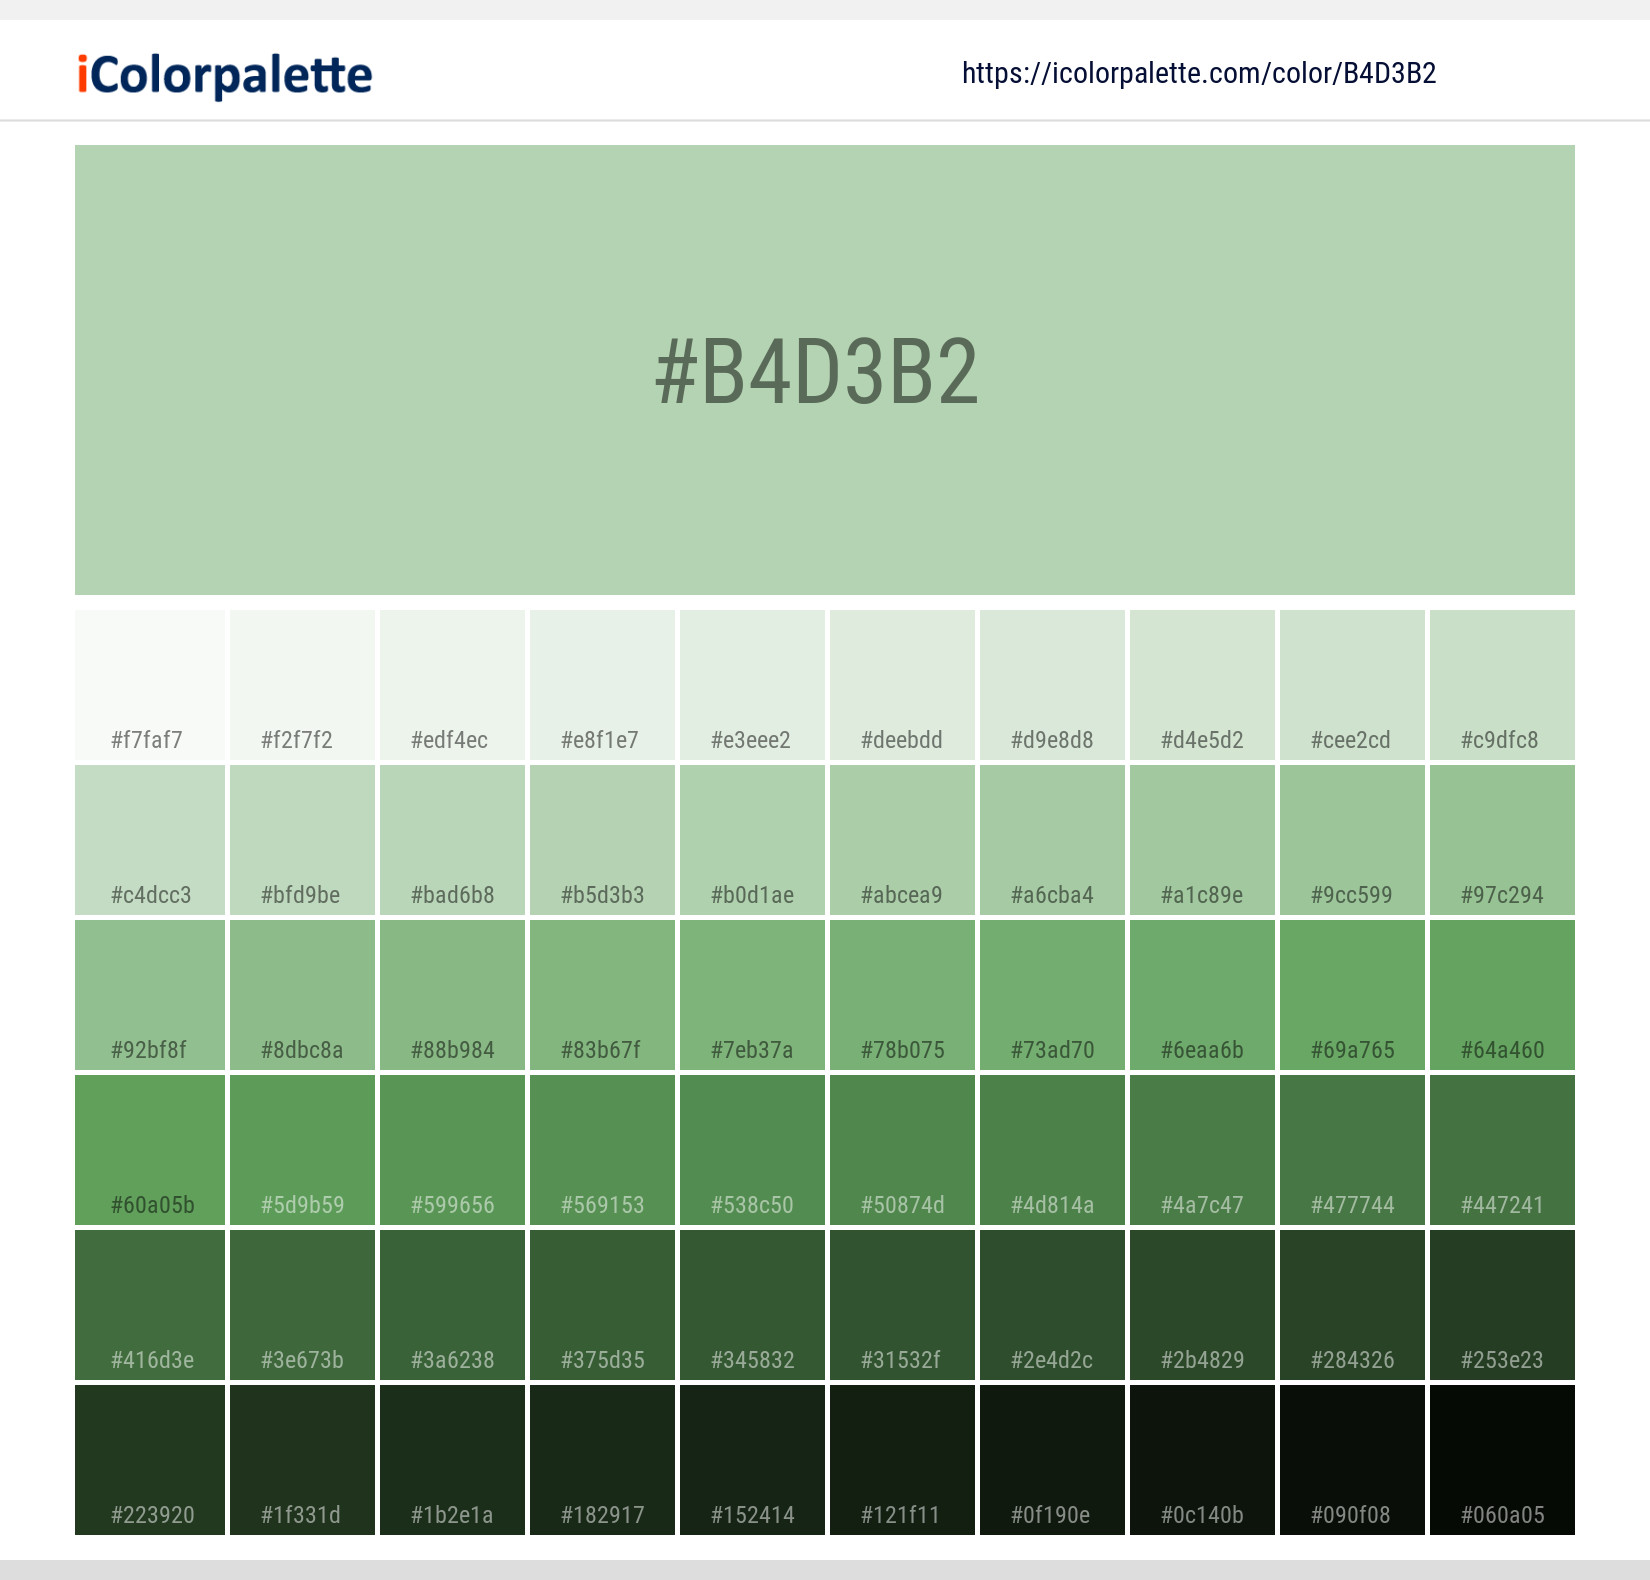 Light Green RGB, CMYK, HEX Color Codes and Color Meaning